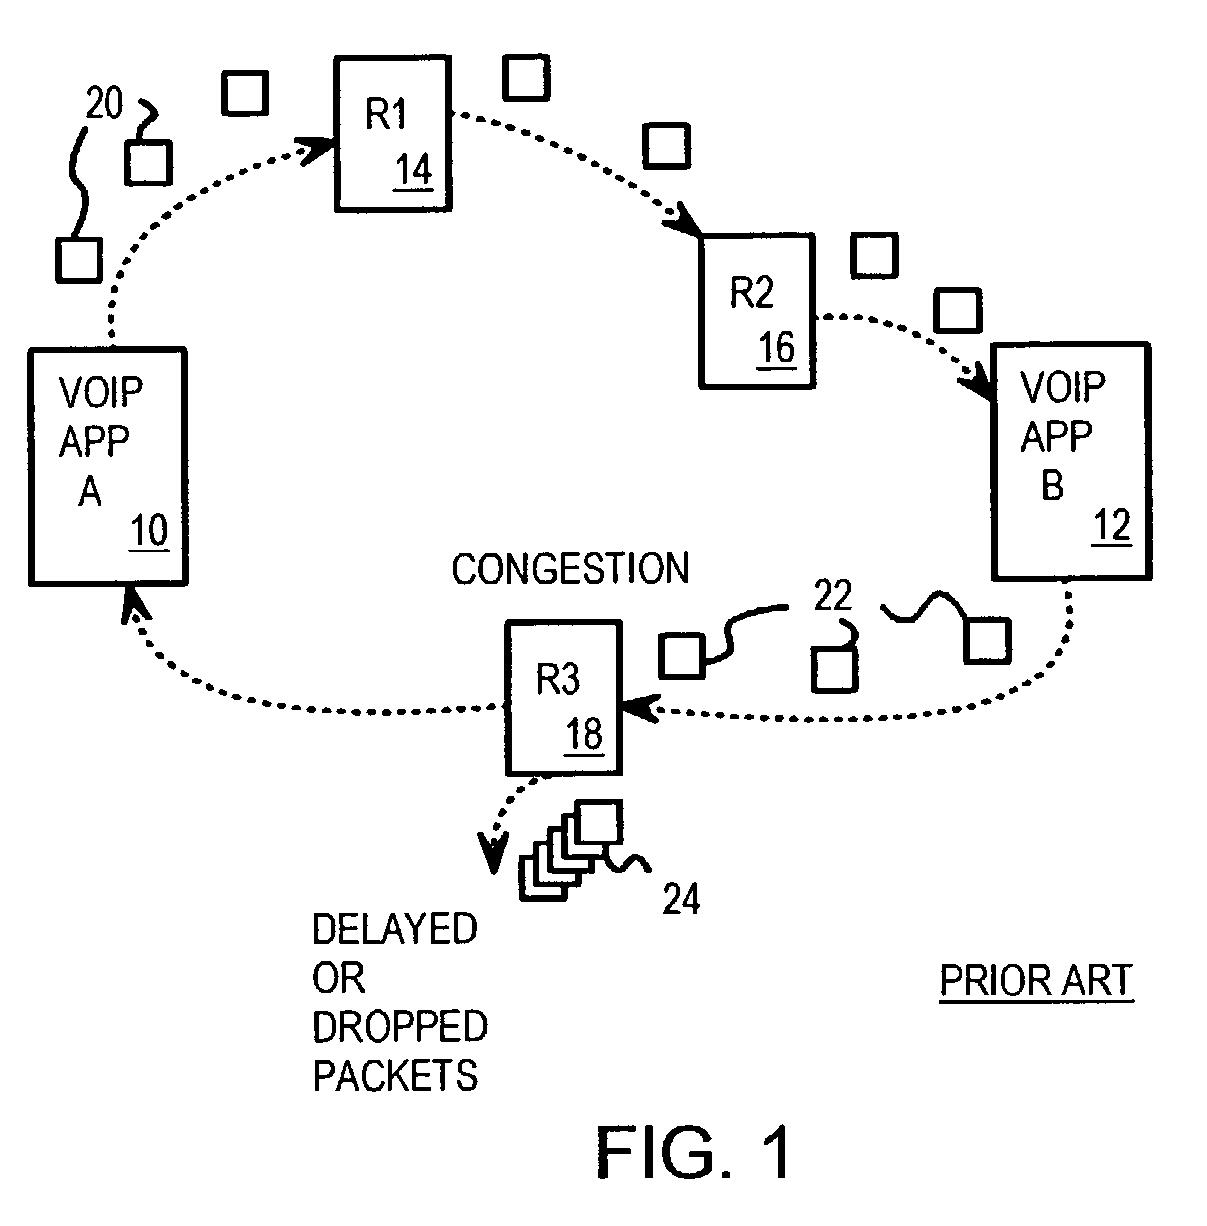 Closed-loop voice-over-internet-protocol (VOIP) with sender-controlled bandwidth adjustments prior to onset of packet losses